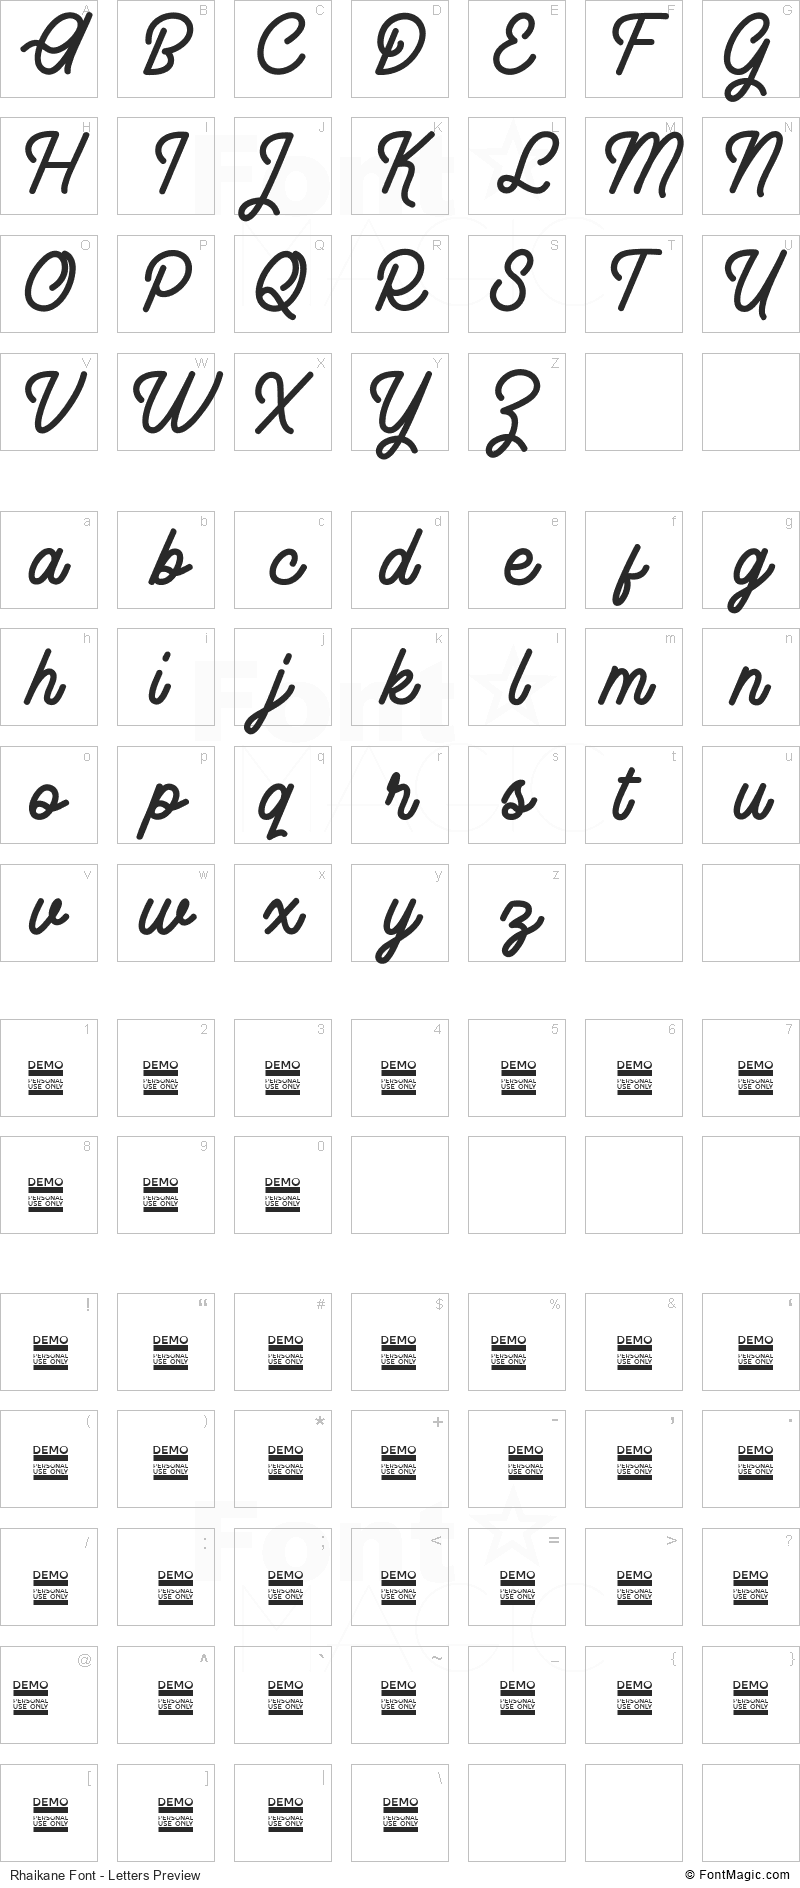 Rhaikane Font - All Latters Preview Chart